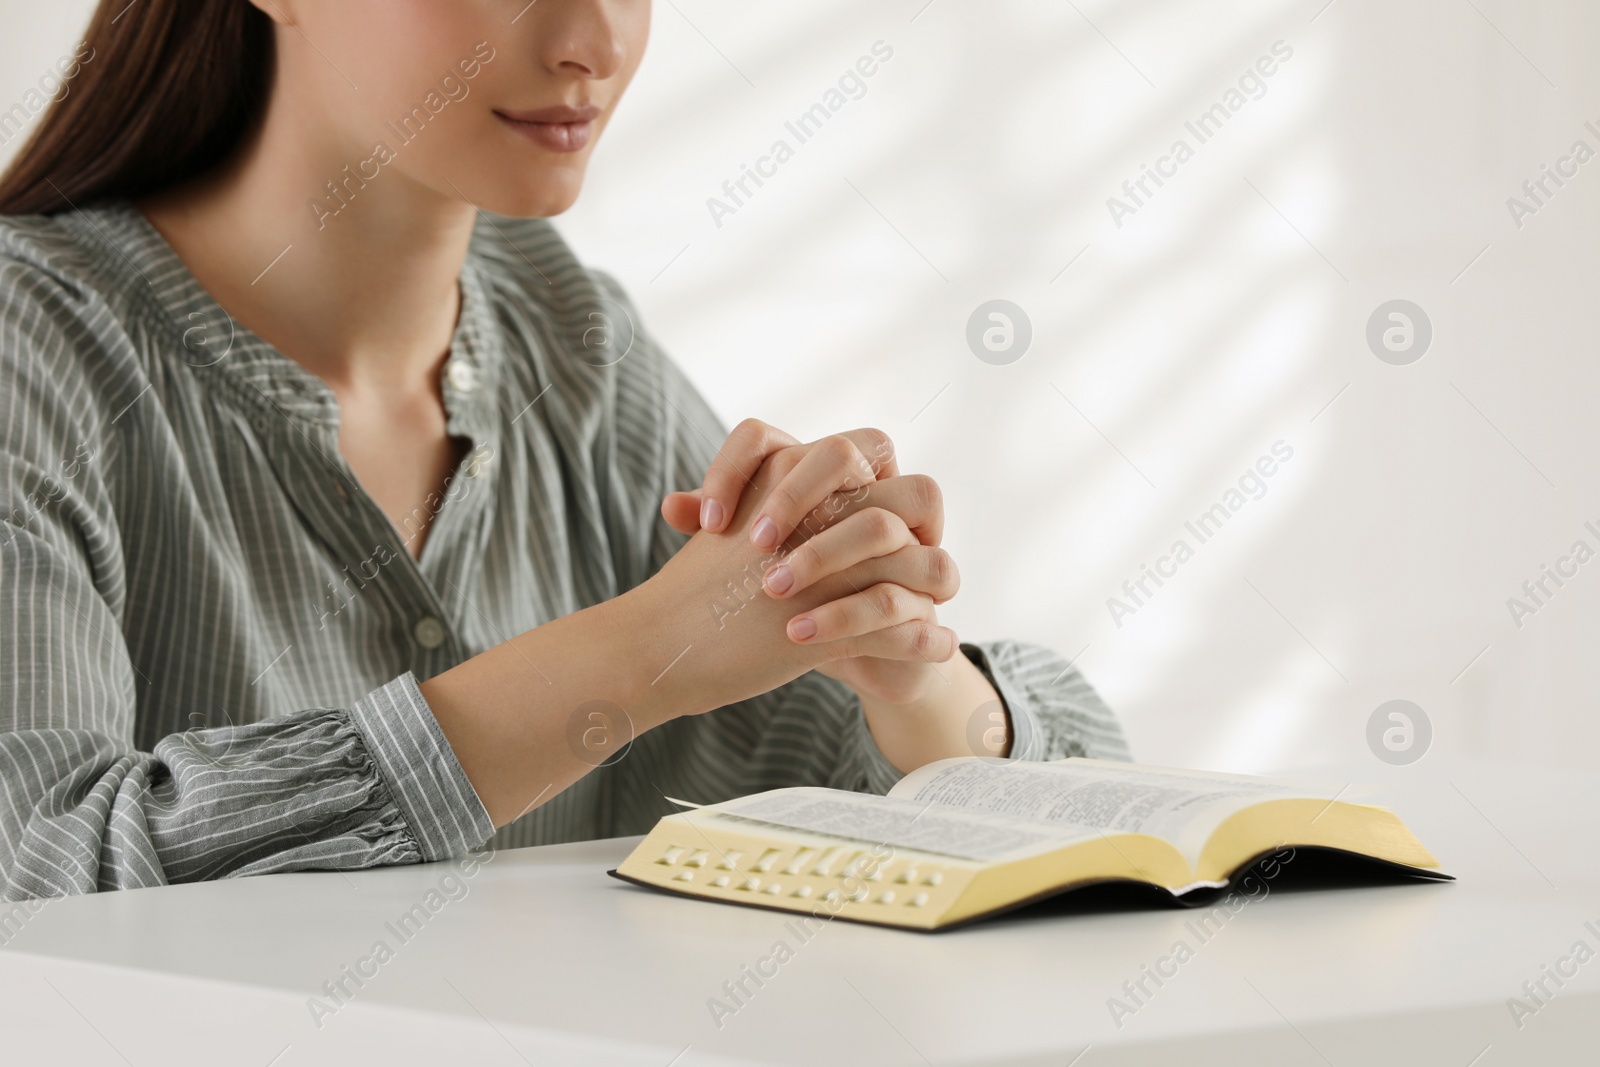 Photo of Religious woman praying over Bible at table indoors, closeup